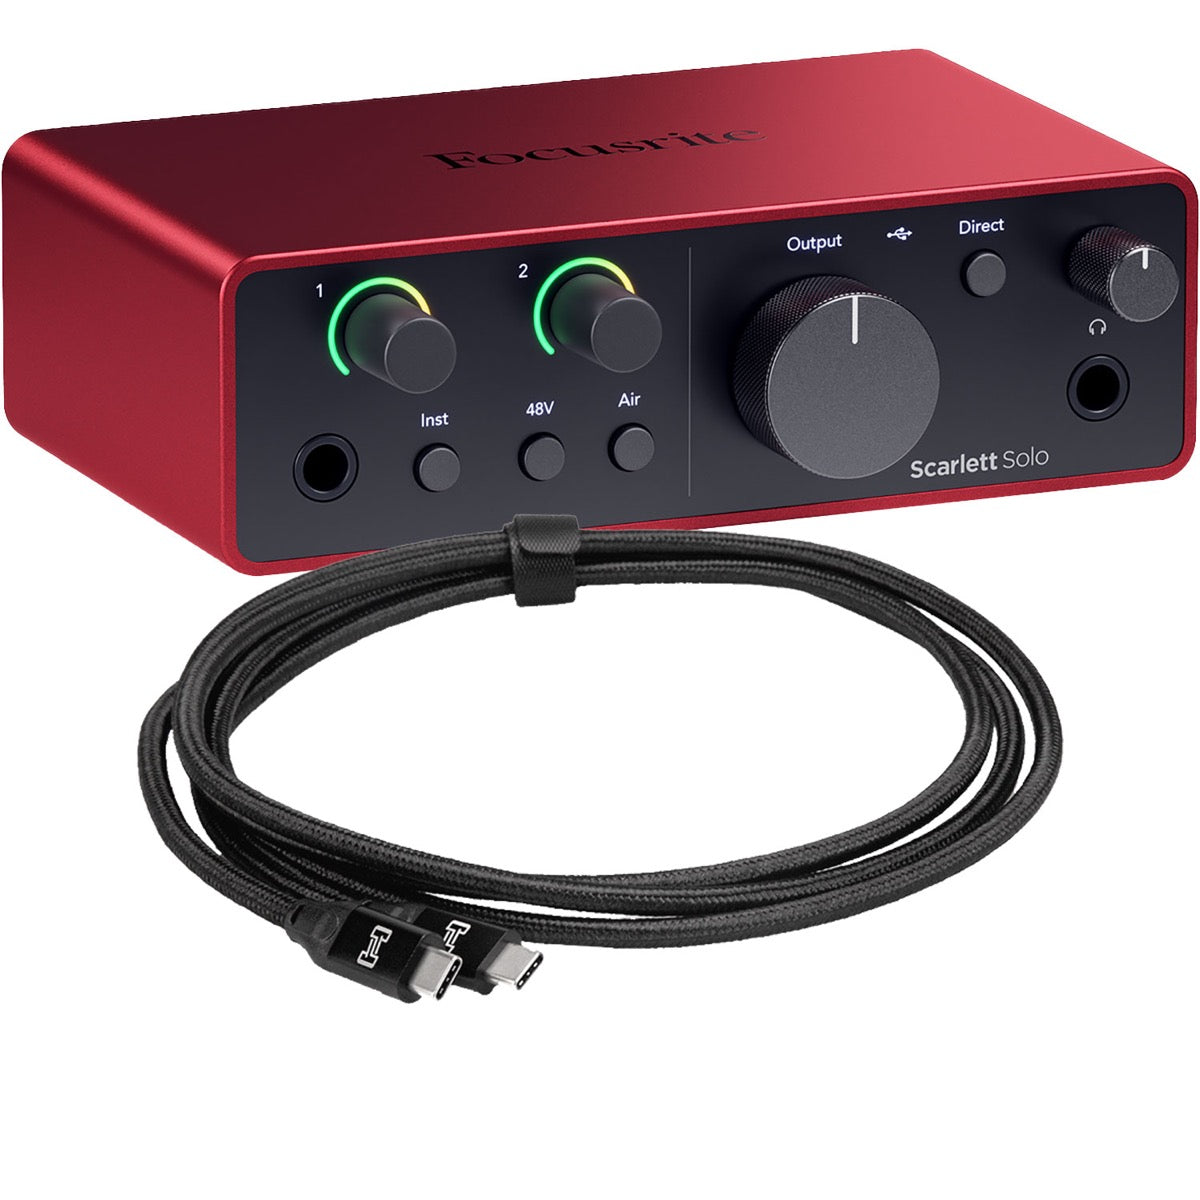 Review: New Focusrite Scarlett 4th Gen audio interfaces are here